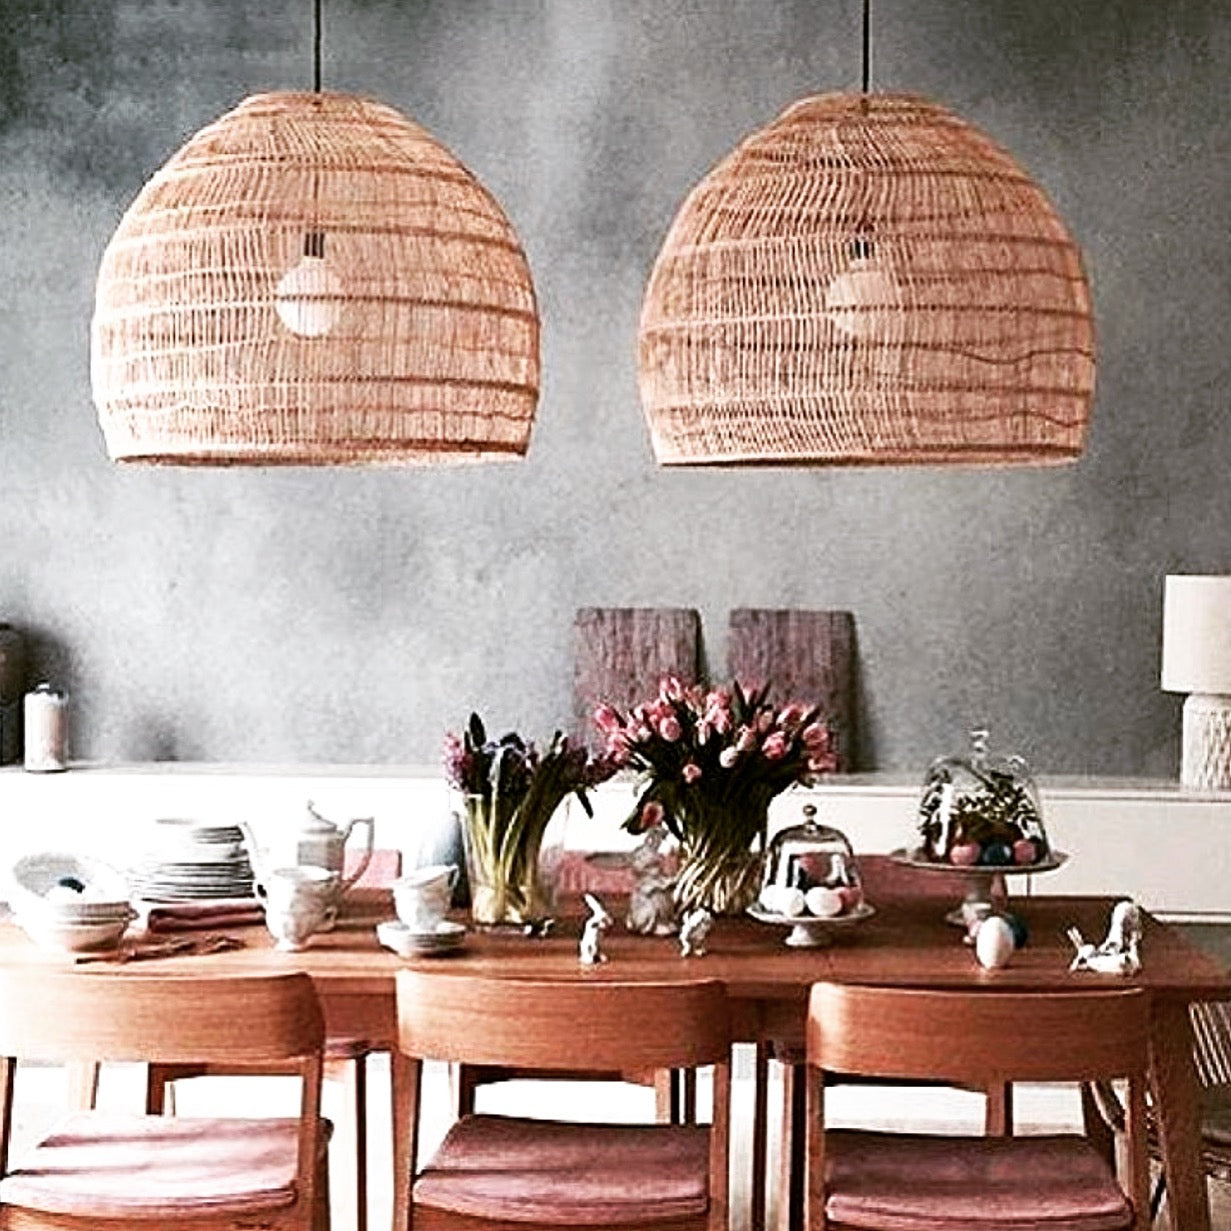 Hand woven large wicker basket pendant light above a dining table